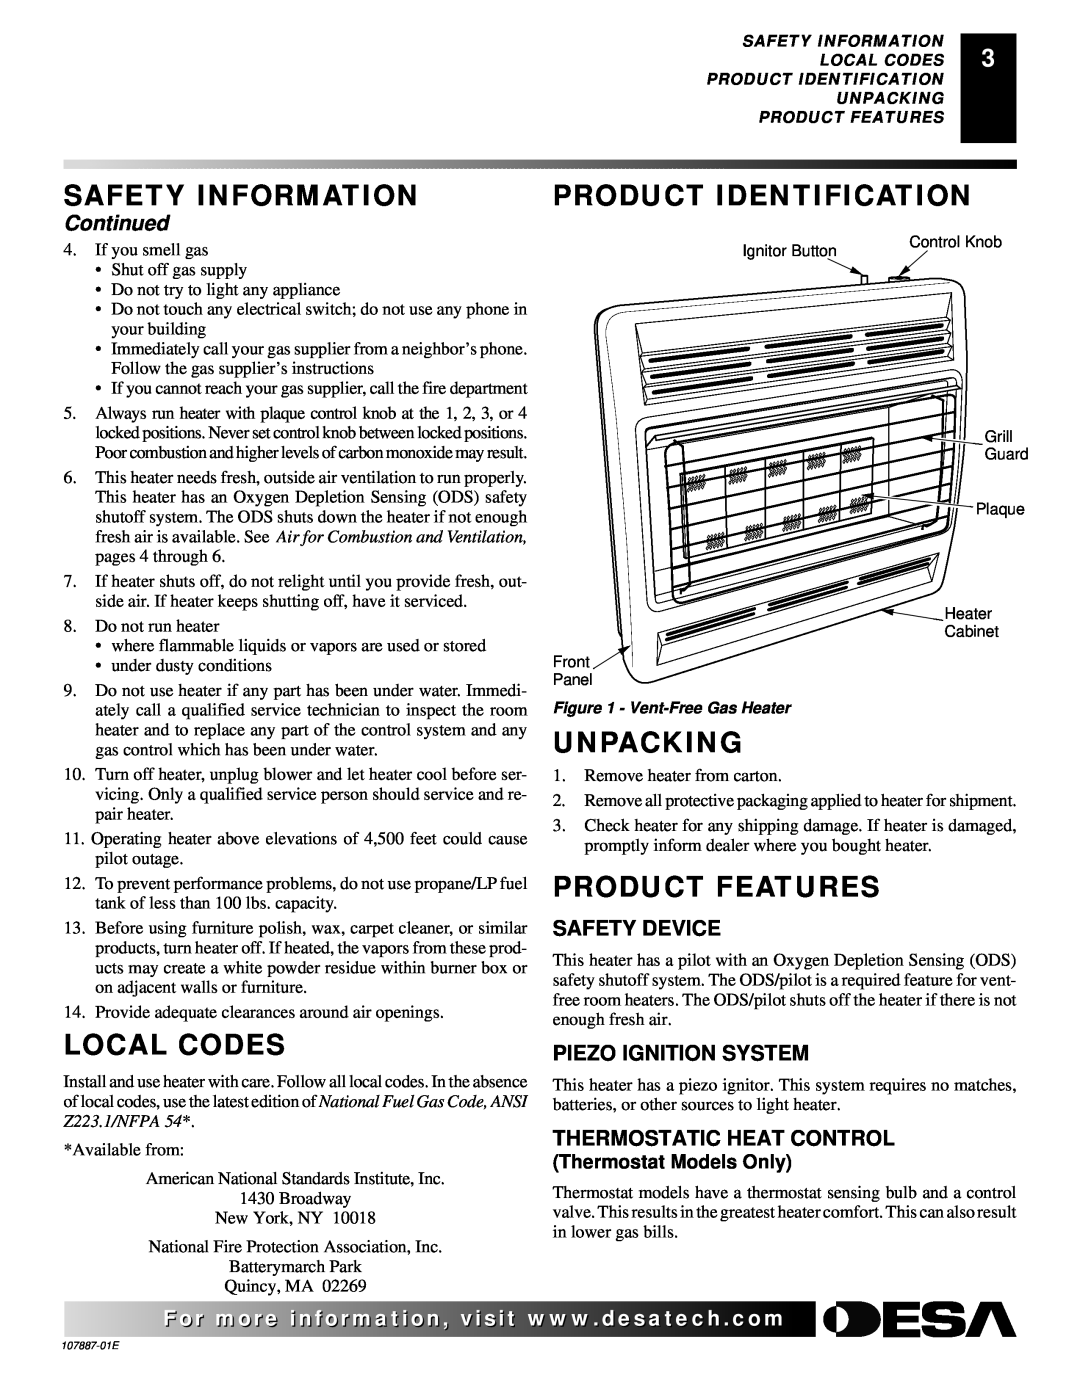 Desa VP16 Product Identification, Unpacking, Product Features, Local Codes, Continued, Safety Device, Safety Information 